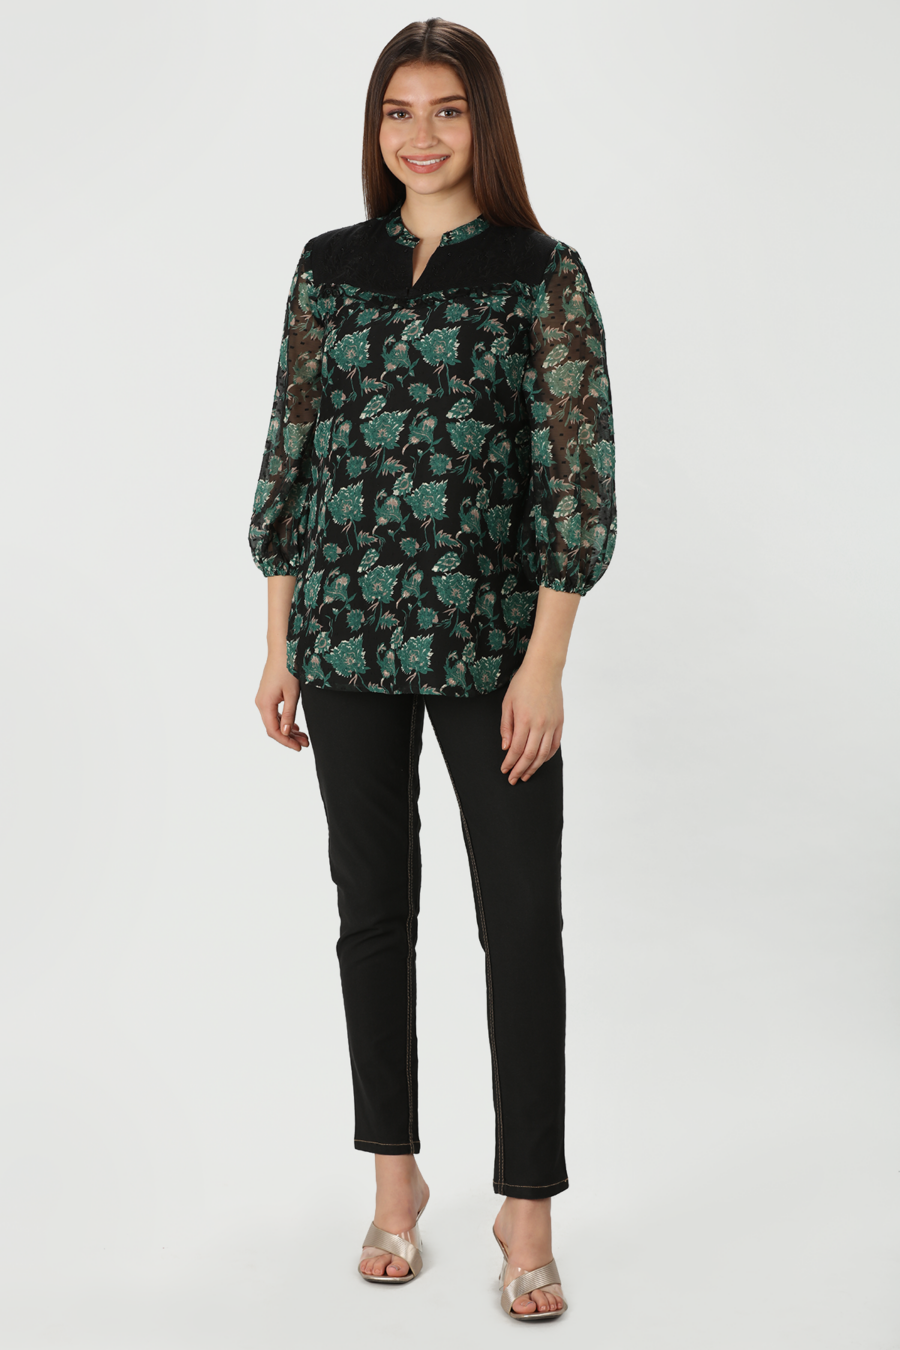 Multicolour Embroidered and Floral Print Top